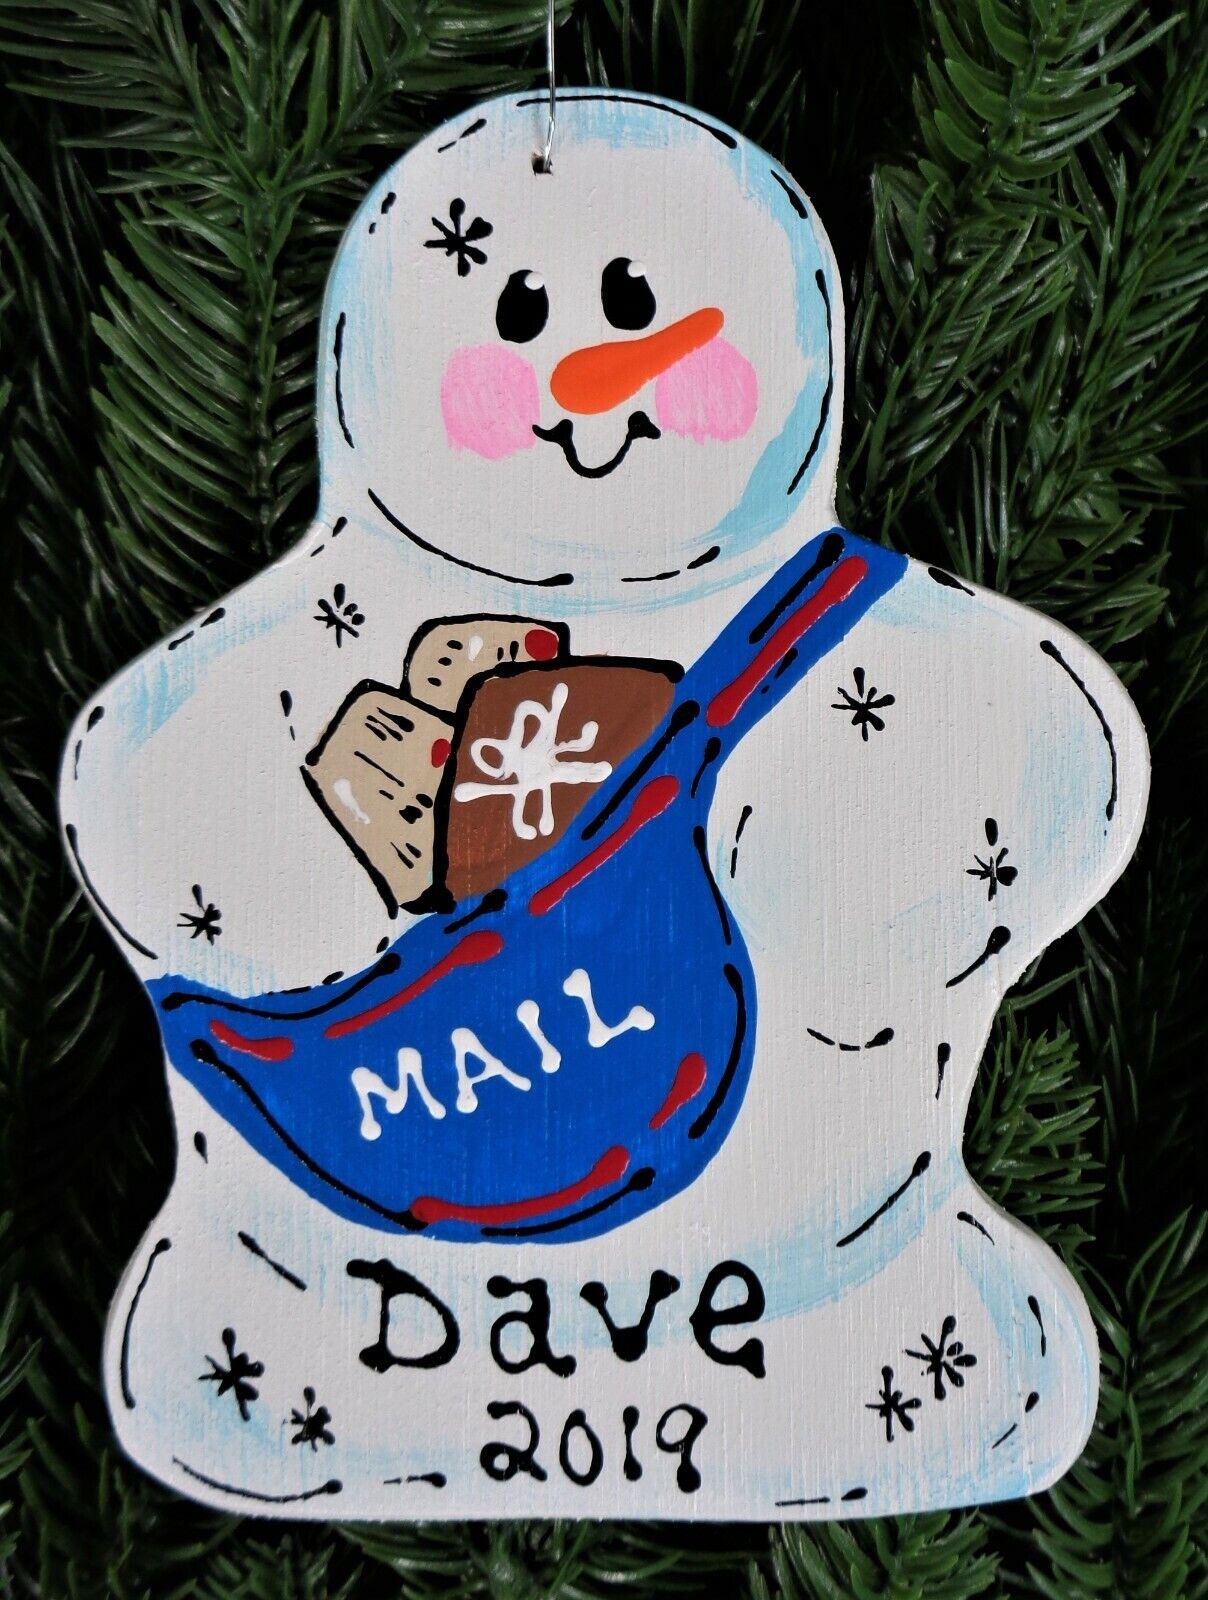 Mailman Mail Carrier Christmas Ornament Personalize U Choose Name & Year Wood